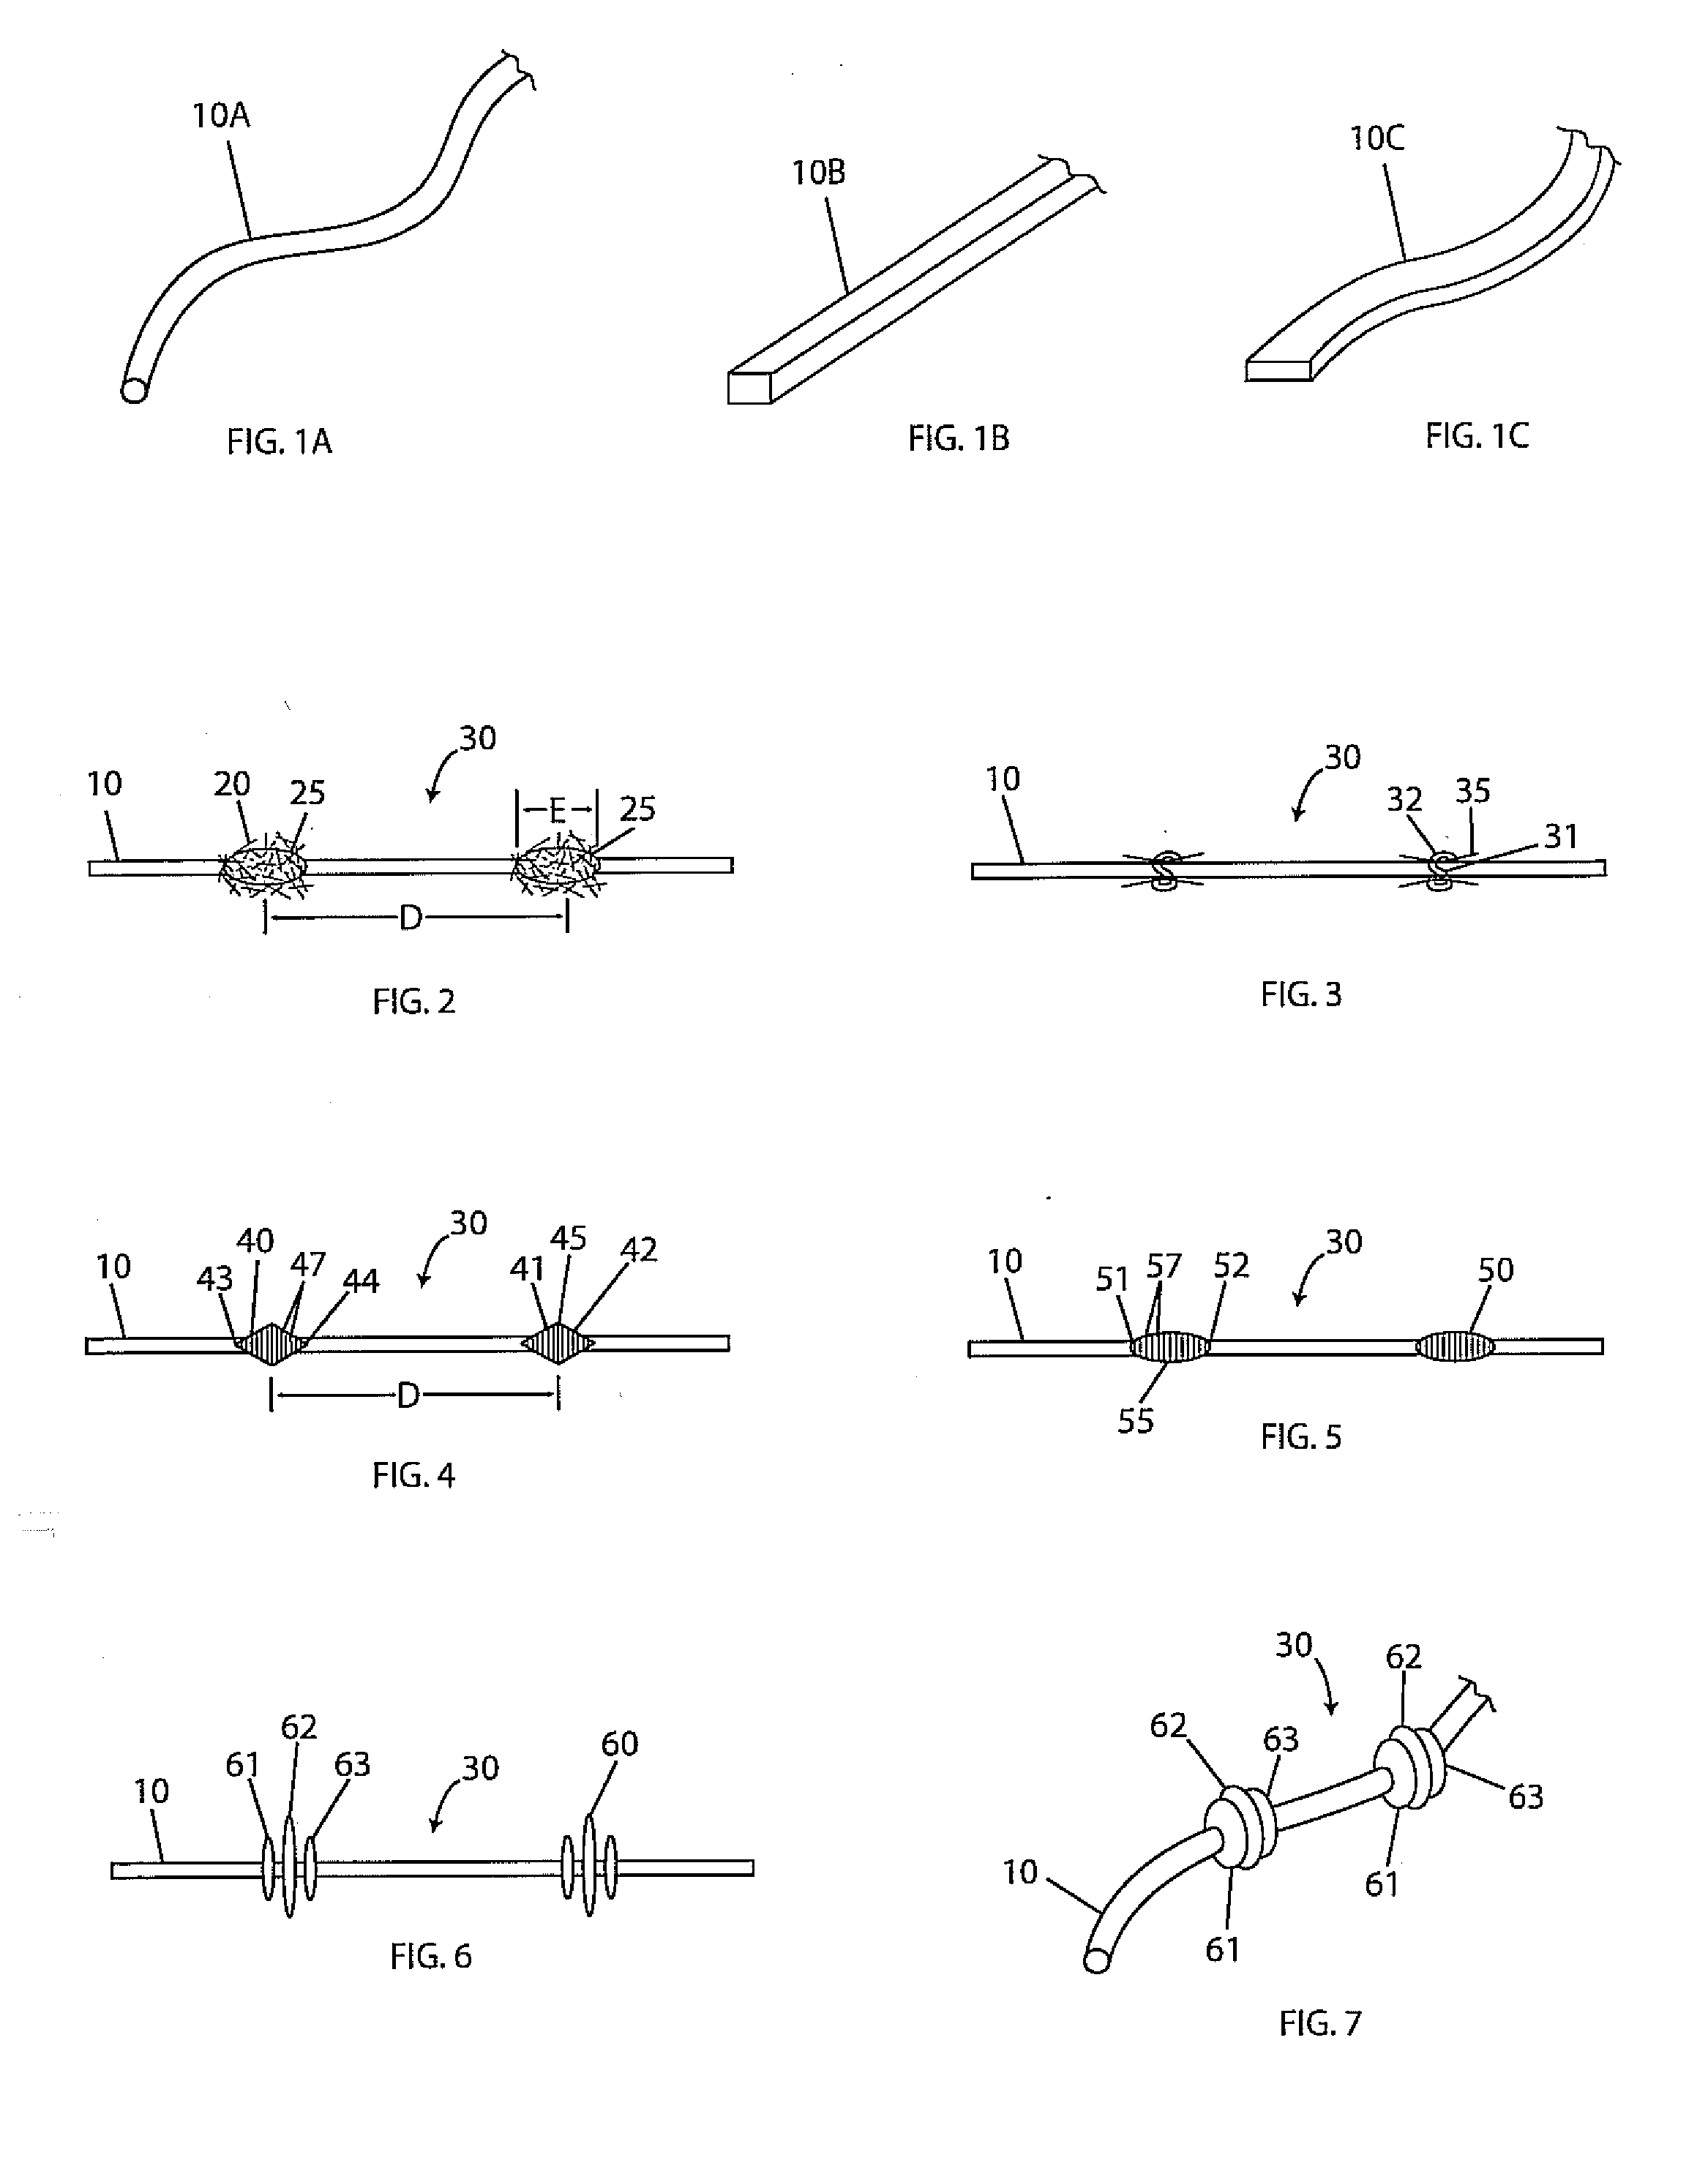 Dental floss apparatus, system and method for cleaning teeth